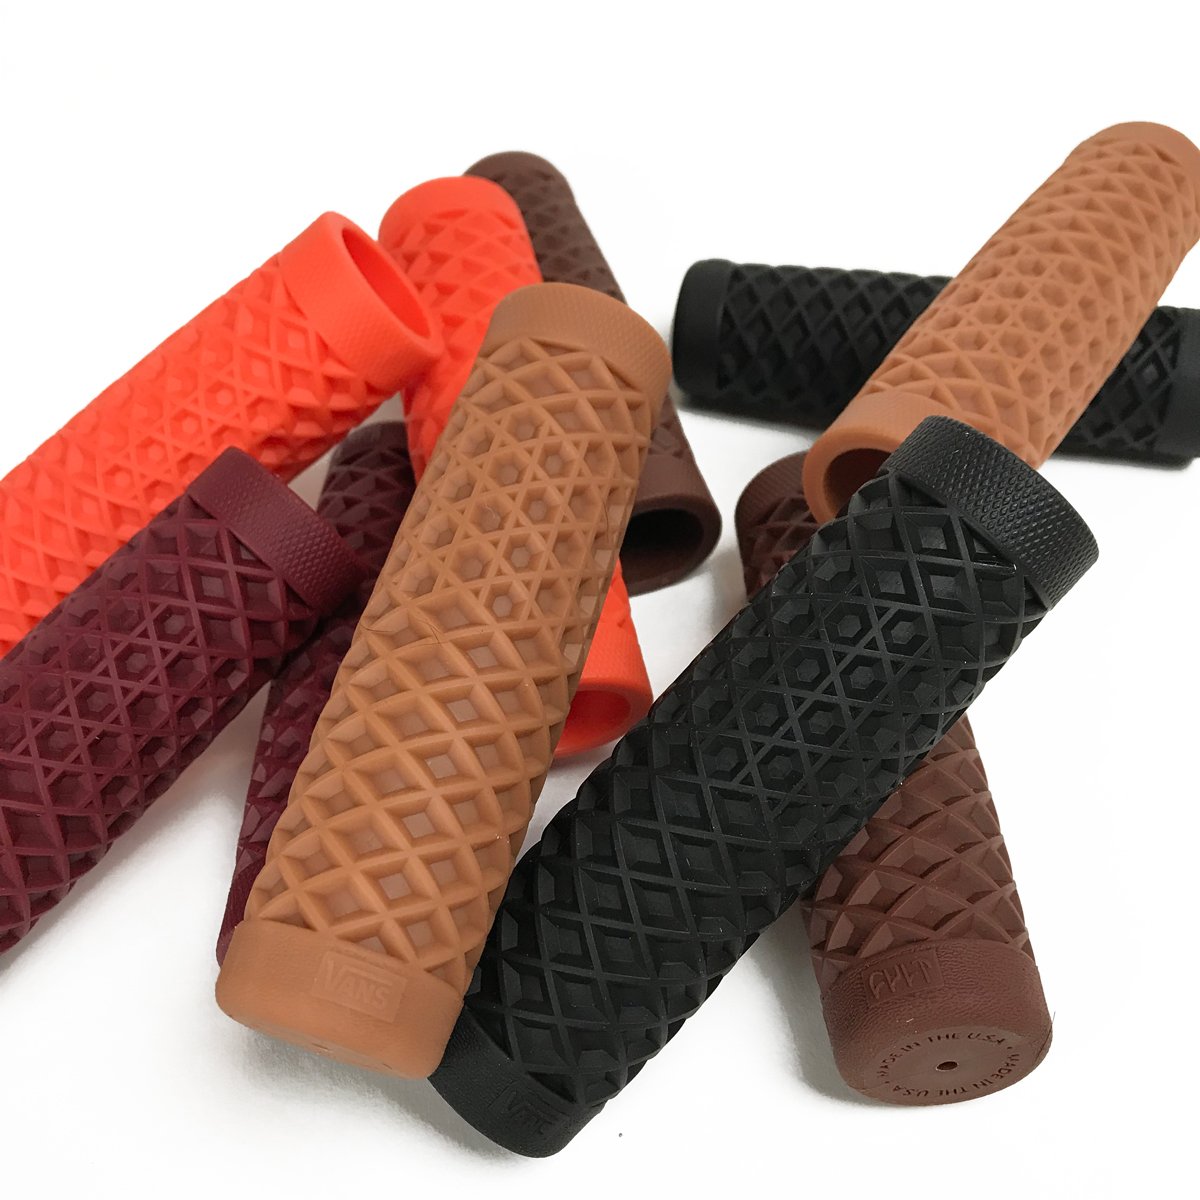 A group of Vans + Cult Motorcycle Grips - 7/8" Black with a waffle grip pattern on a white surface.